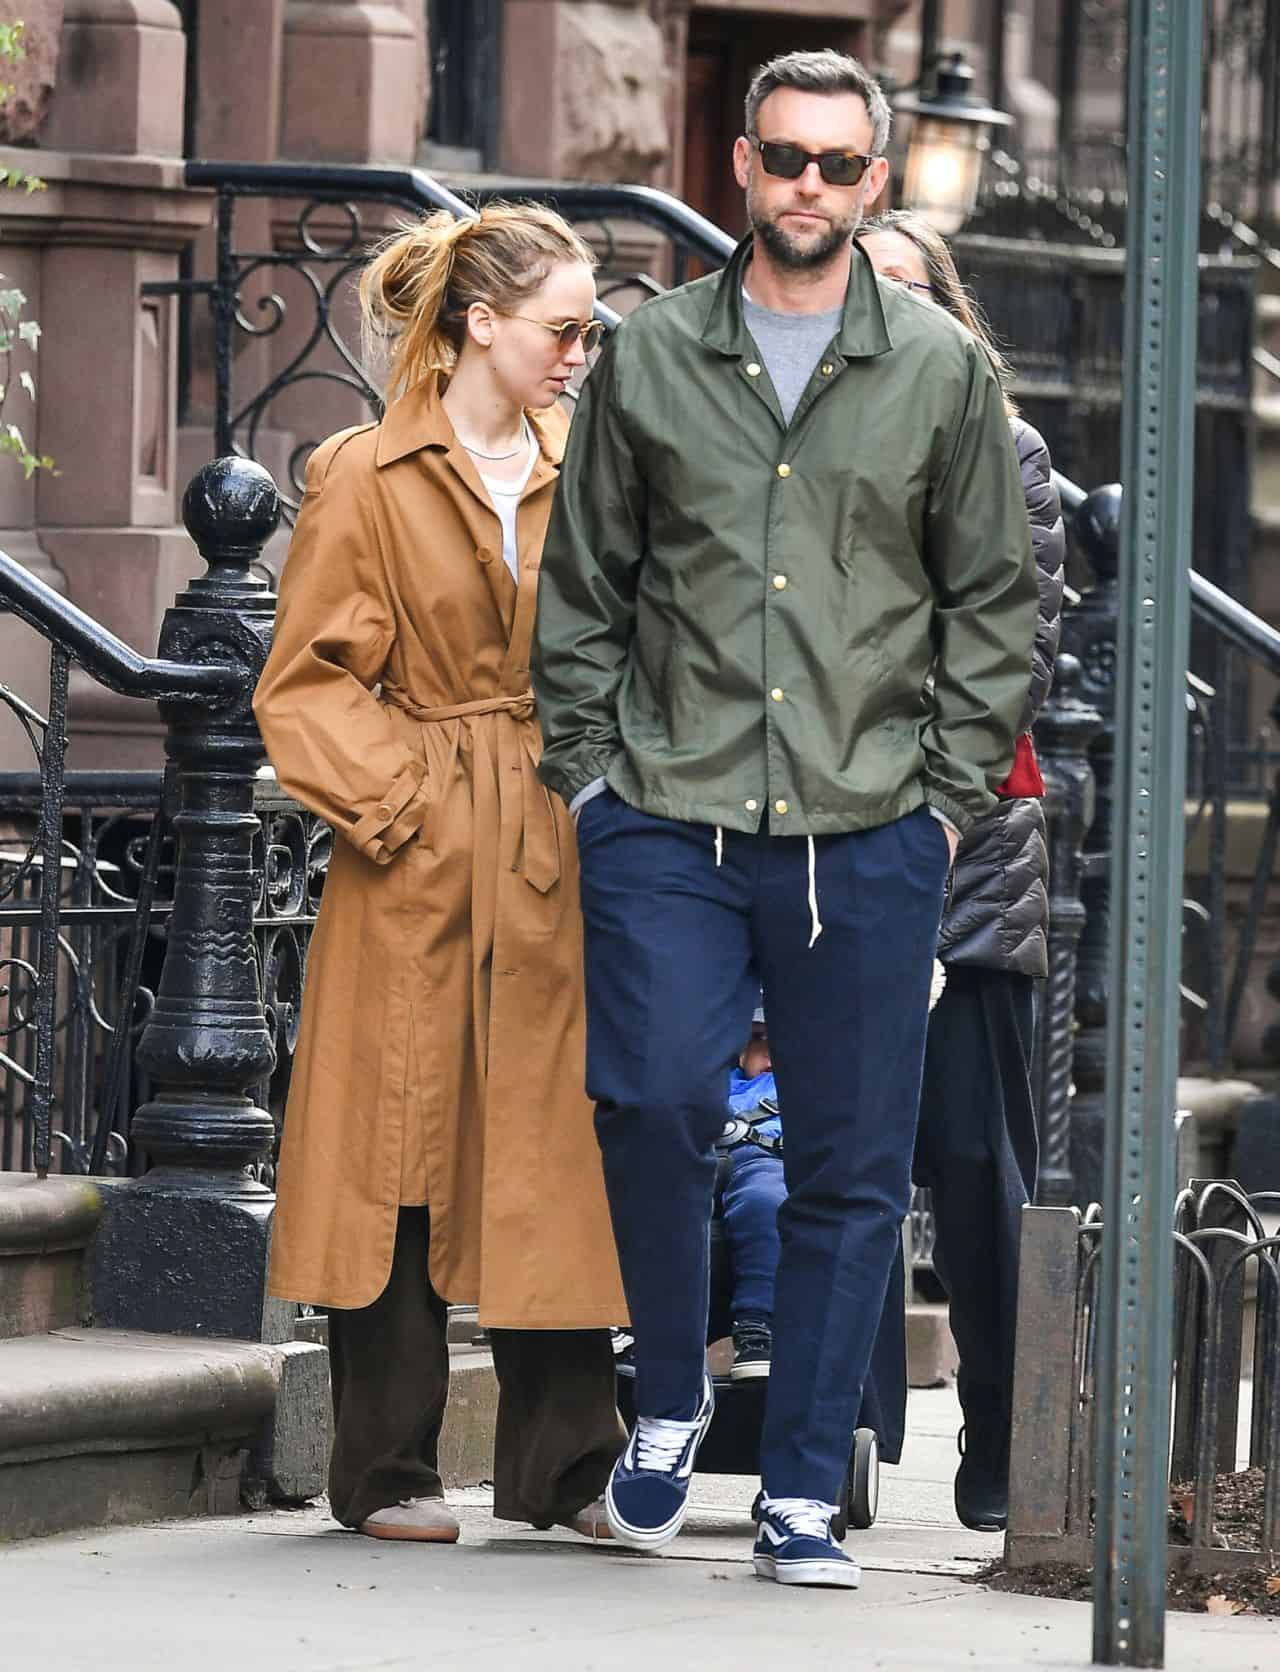 Jennifer Lawrence in a Comfy Yet Stylish Outfit During Morning Walk